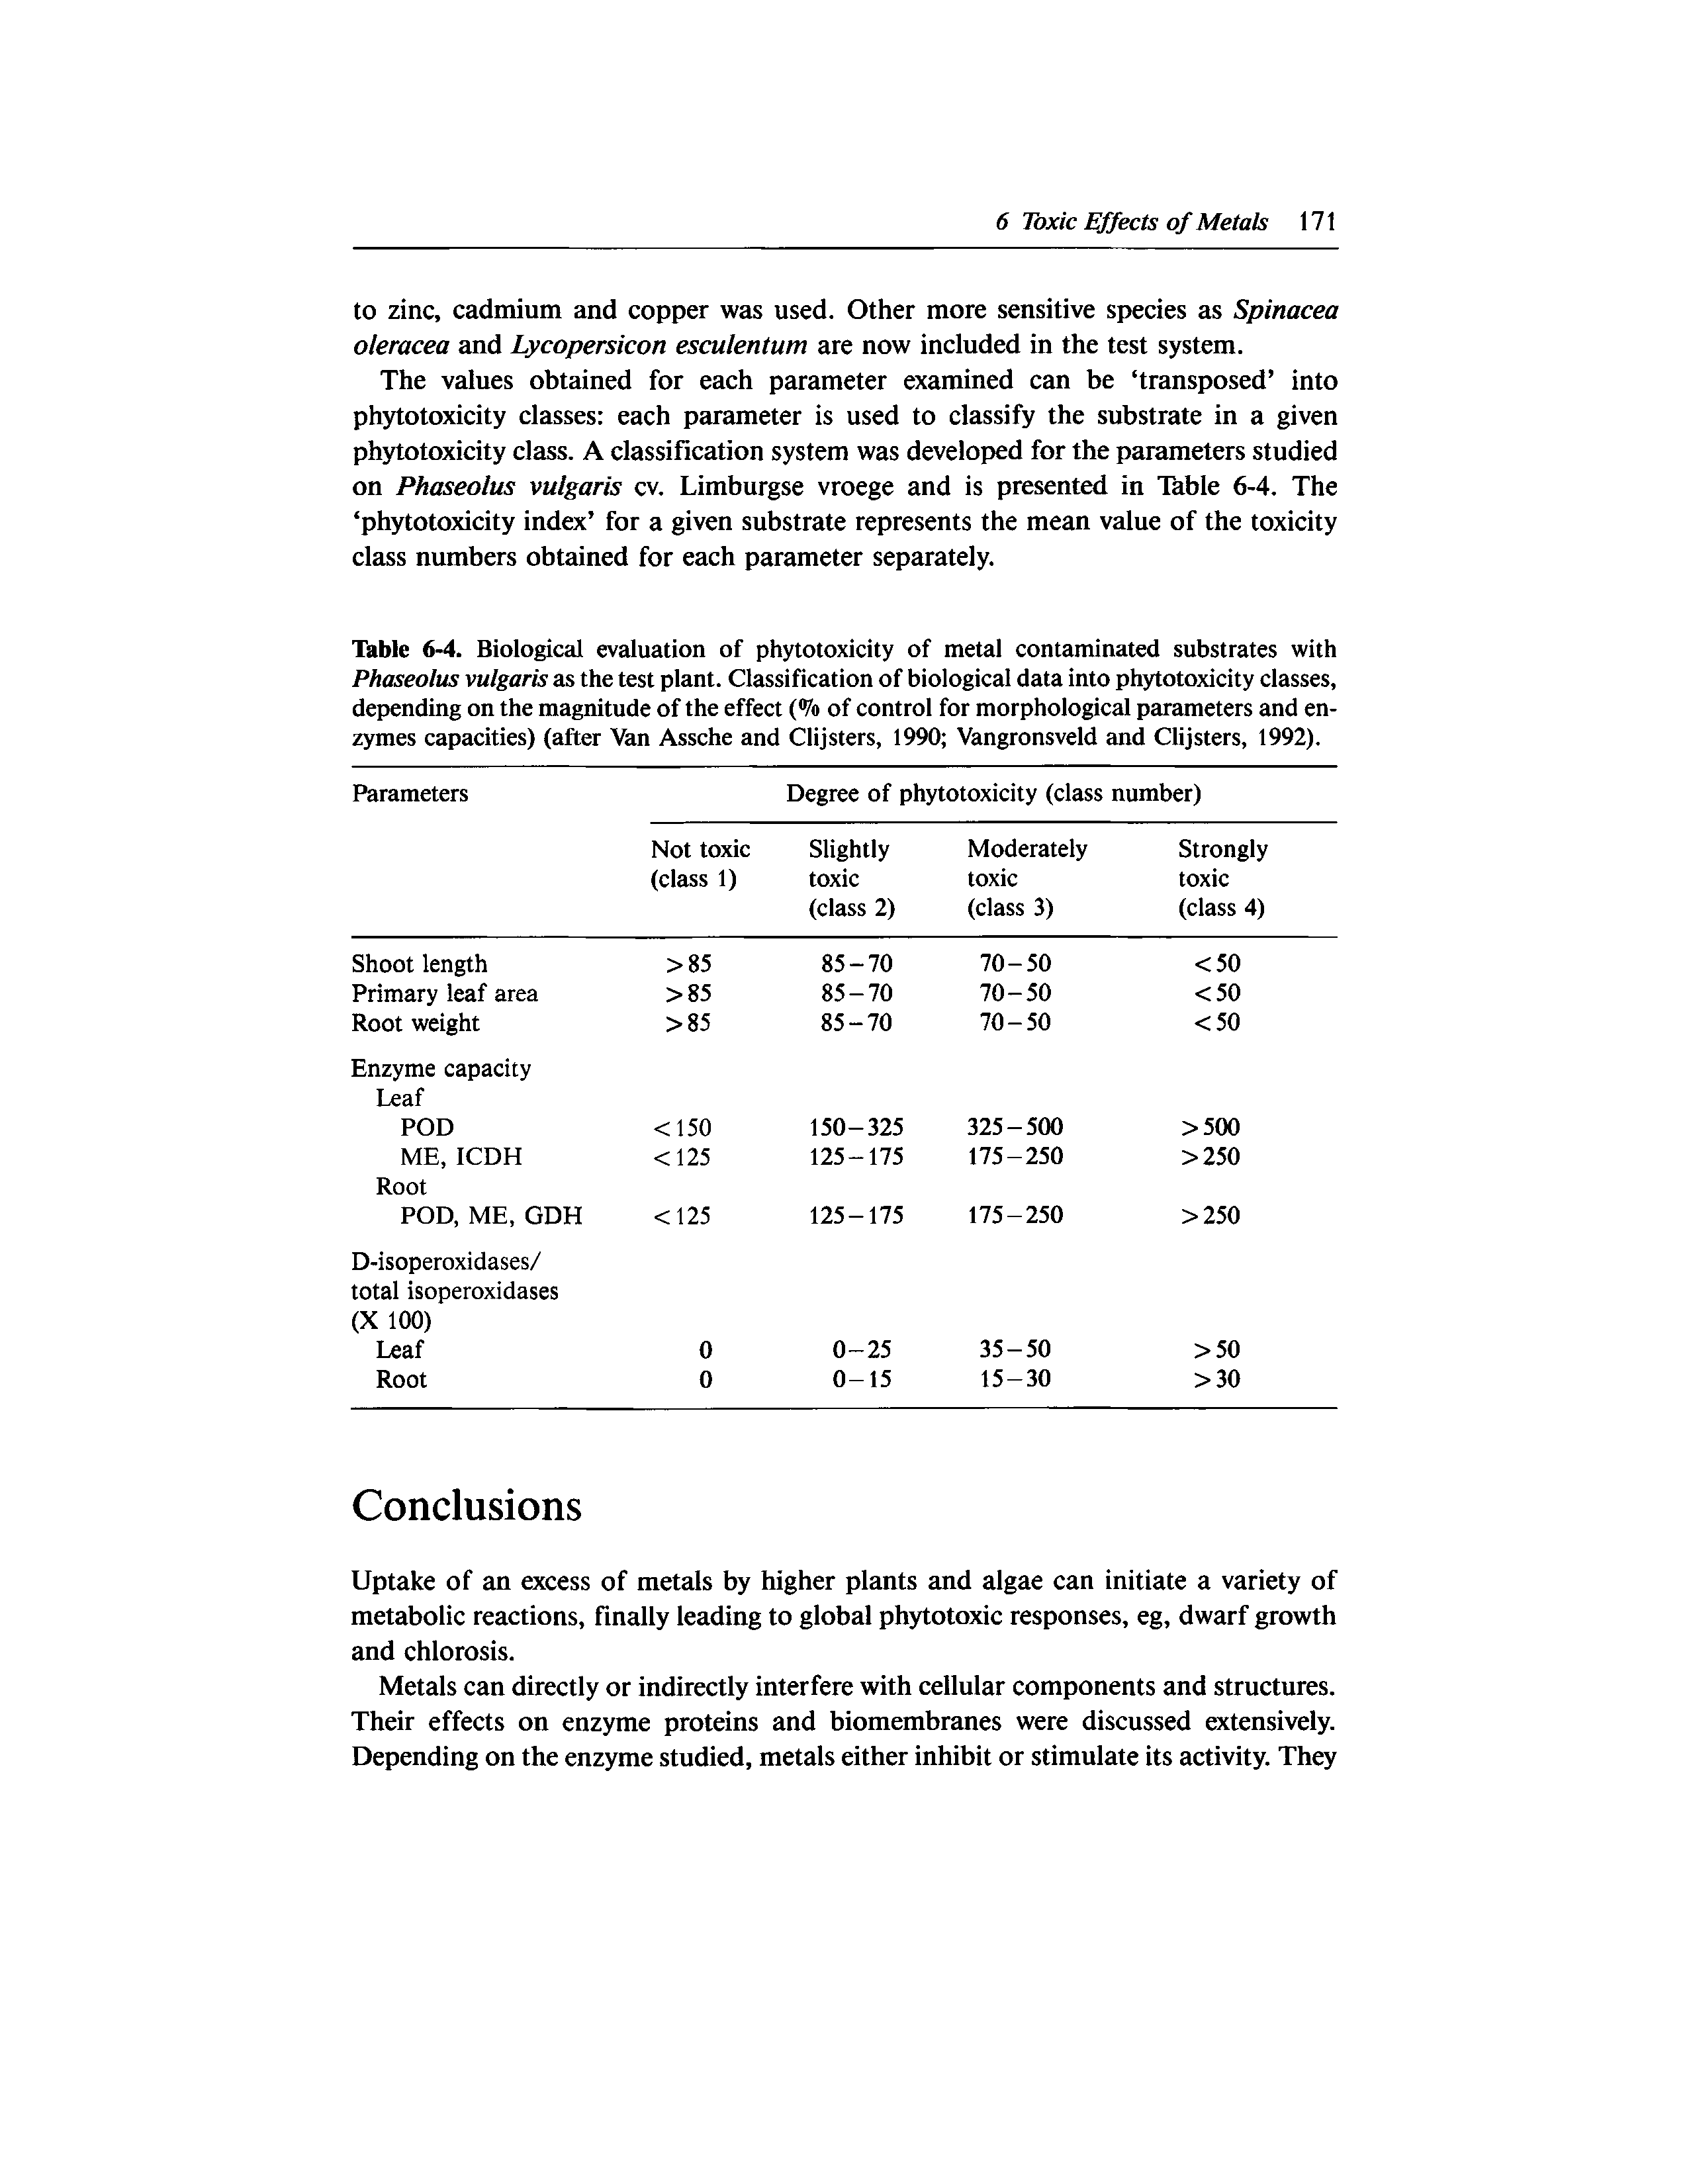 Table 6-4. Biological evaluation of phytotoxicity of metal contaminated substrates with Phaseolus vulgaris as the test plant. Classification of biological data into phytotoxicity classes, depending on the magnitude of the effect (% of control for morphological parameters and enzymes capacities) (after Van Assche and Clijsters, 1990 Vangronsveld and Clijsters, 1992).